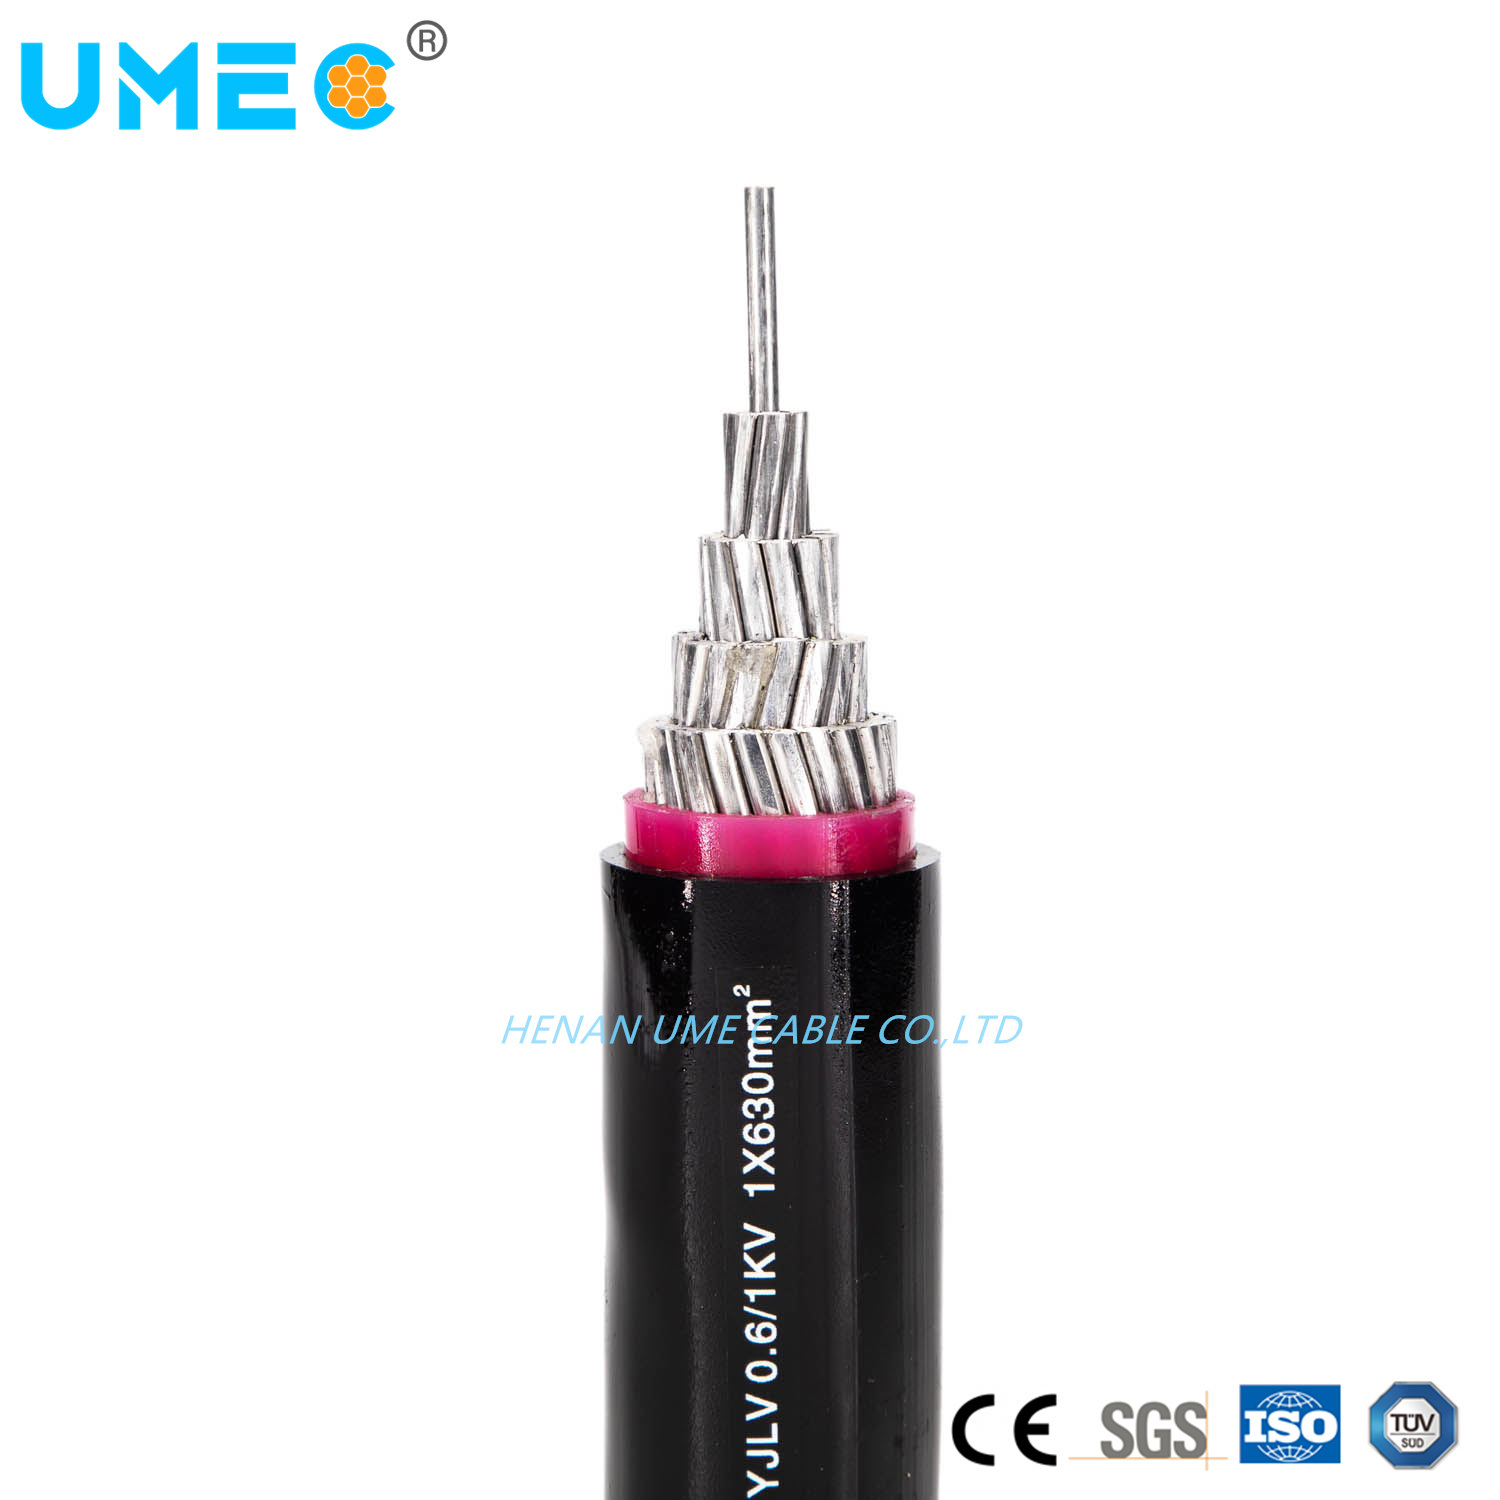 Nh-Yjlv XLPE Insulated PVC Sheathed Fire Resistant Power Cable